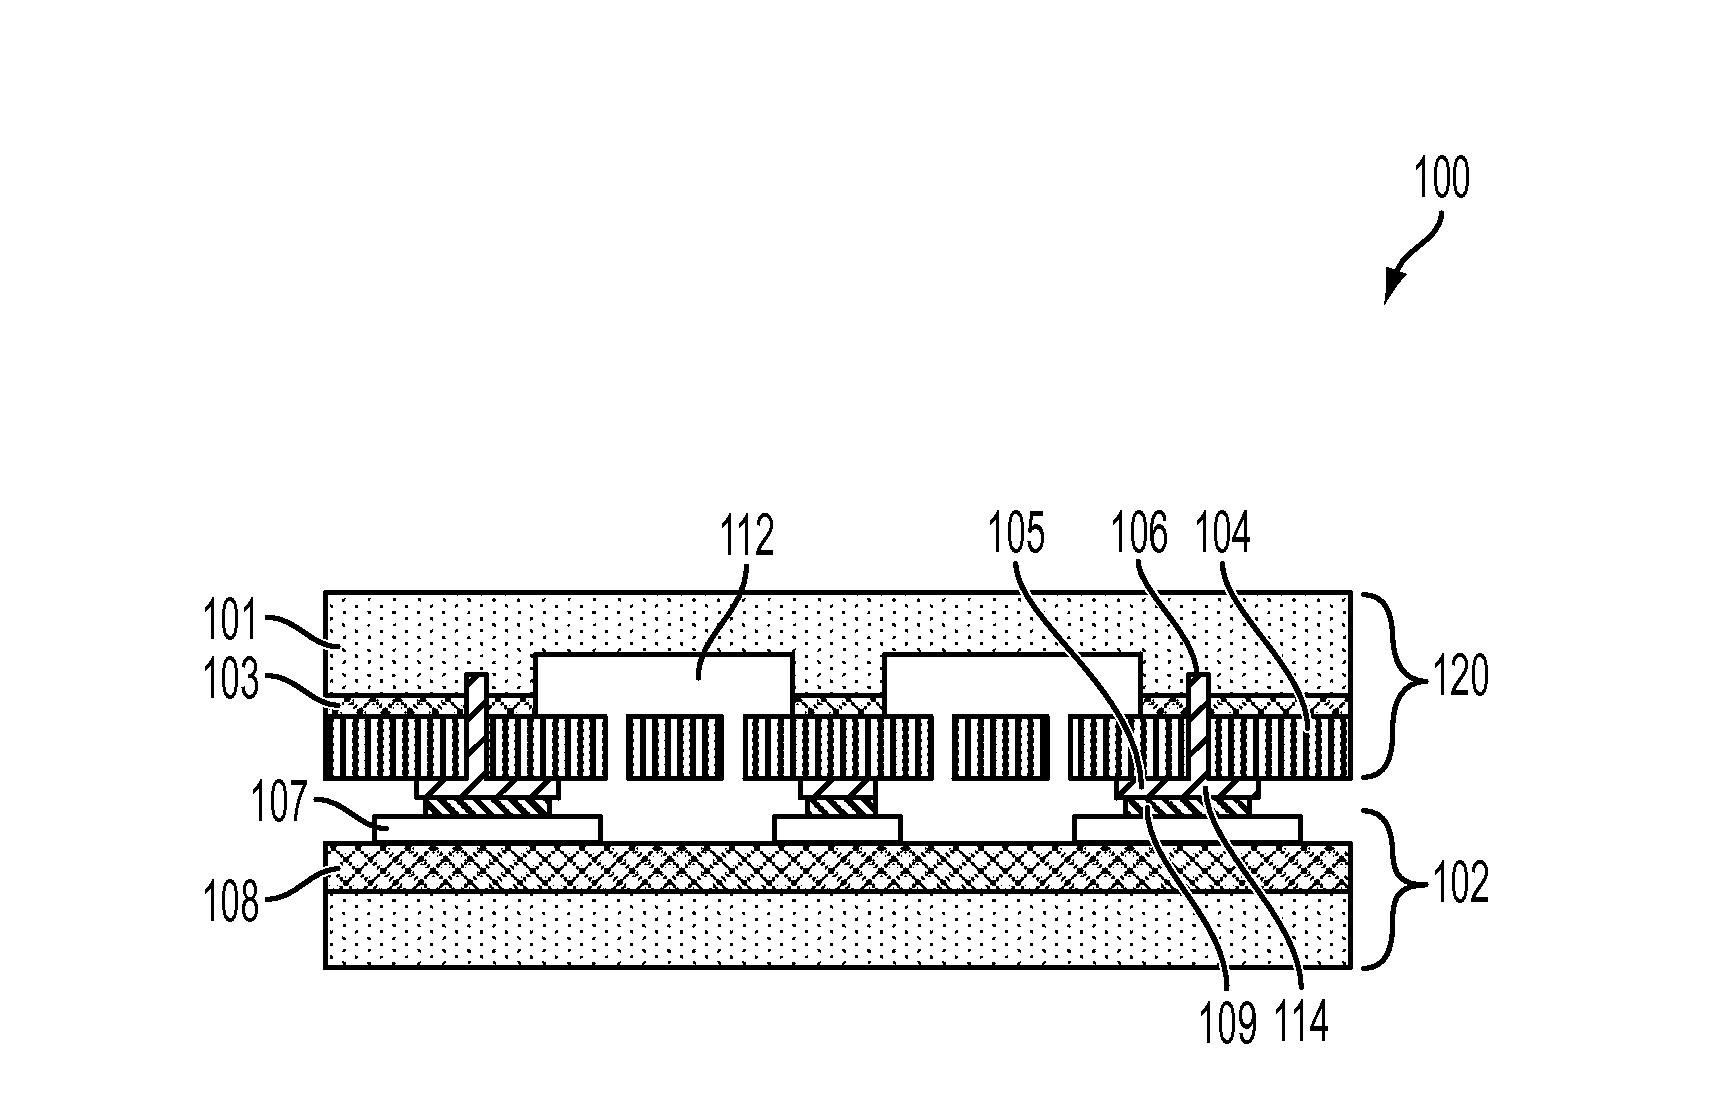 Internal electrical contact for enclosed MEMS devices